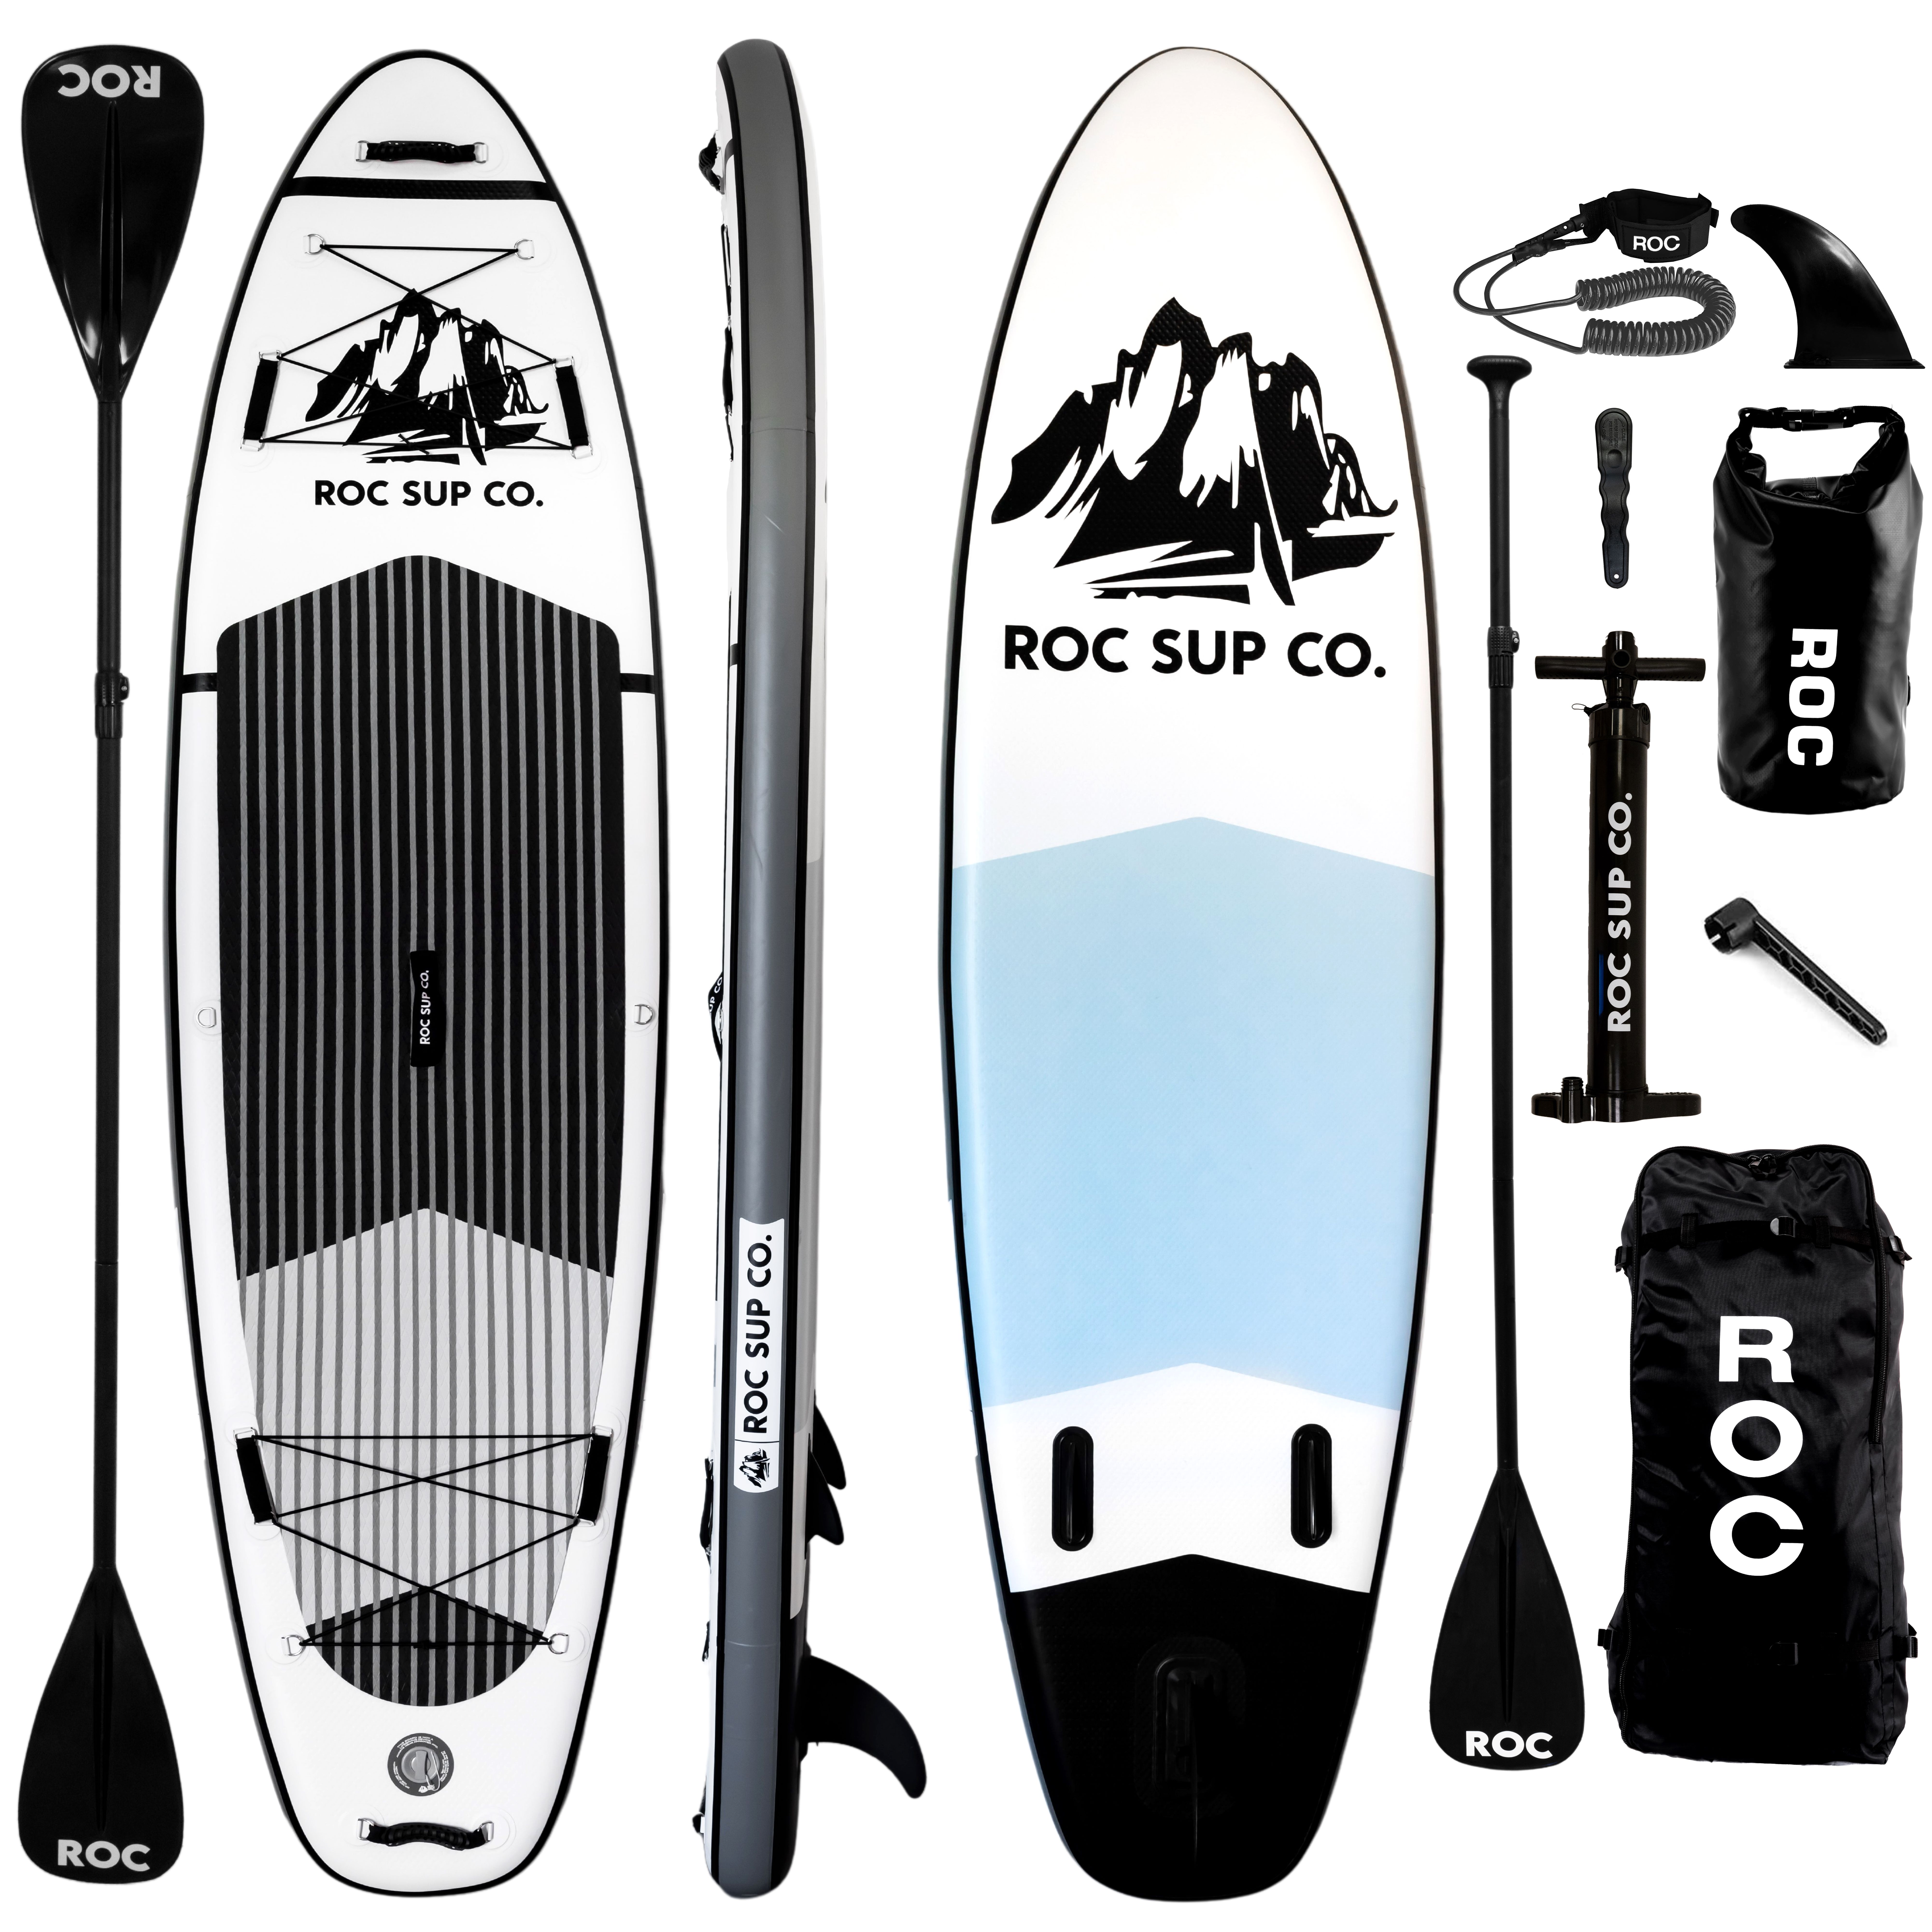 Roc Inflatable Stand Up Paddle Board with Premium sup Accessories & Backpack, Non-Slip Deck, Waterproof Bag, Leash, Paddle and Hand Pump - image 1 of 5